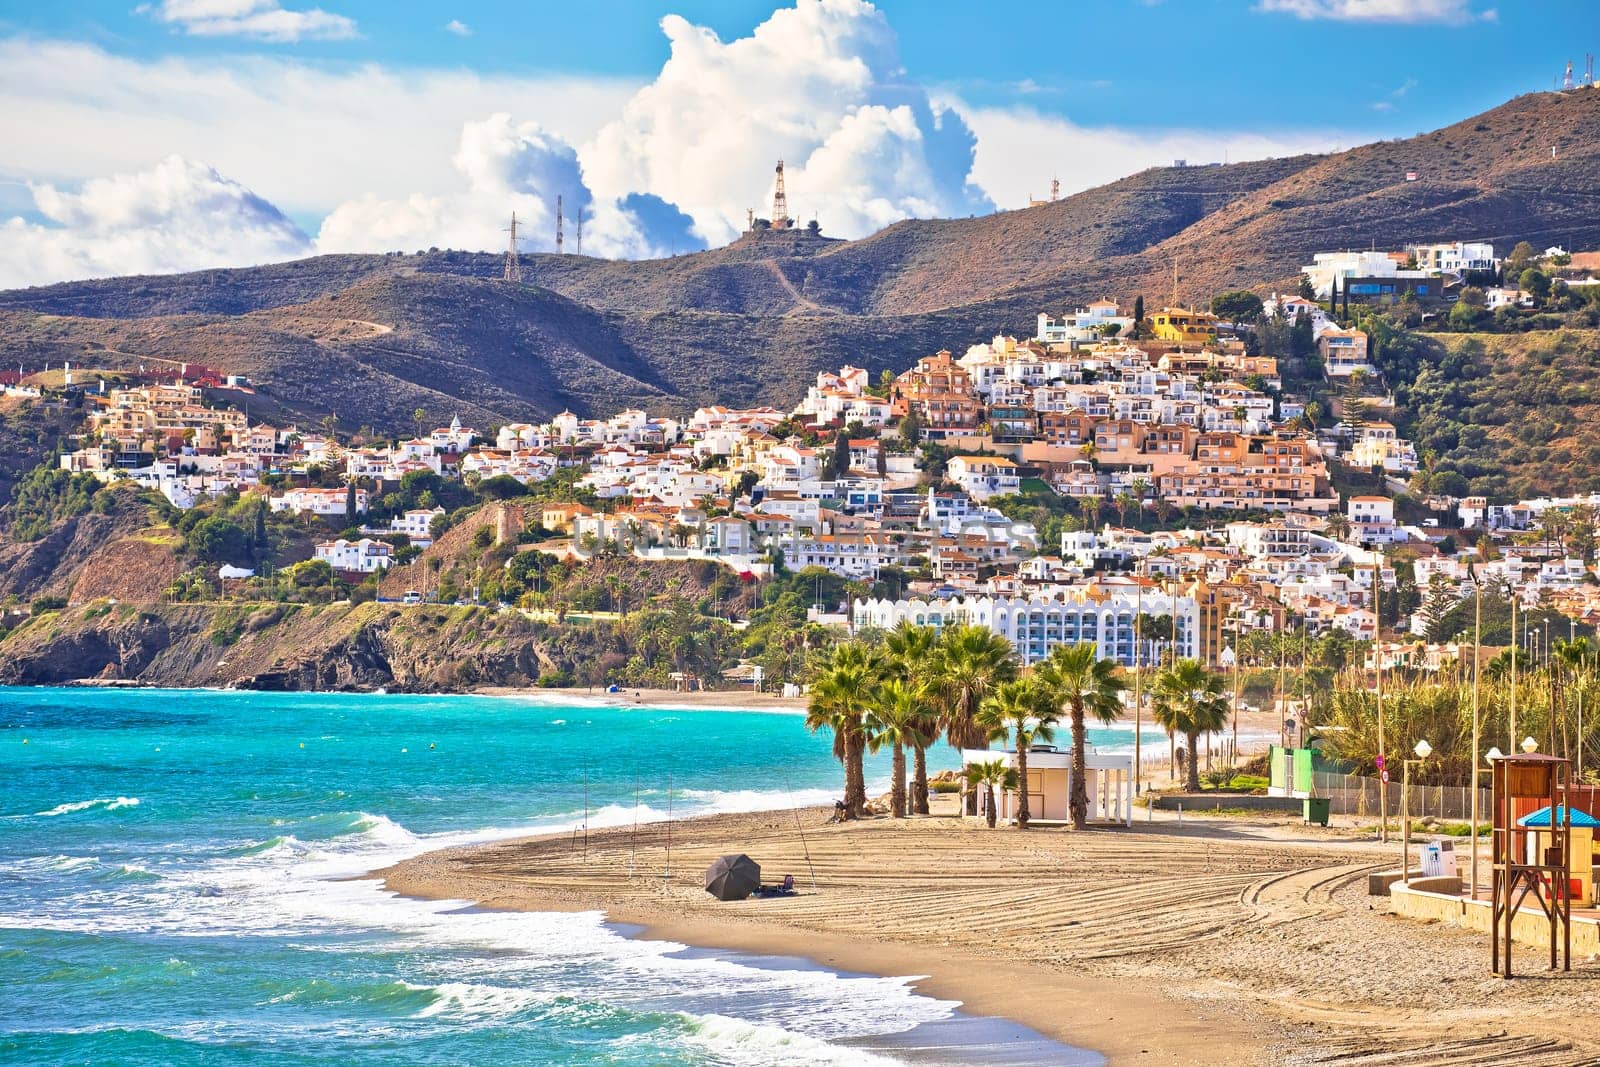 Town of Nerja turquoise sand  beach view by xbrchx